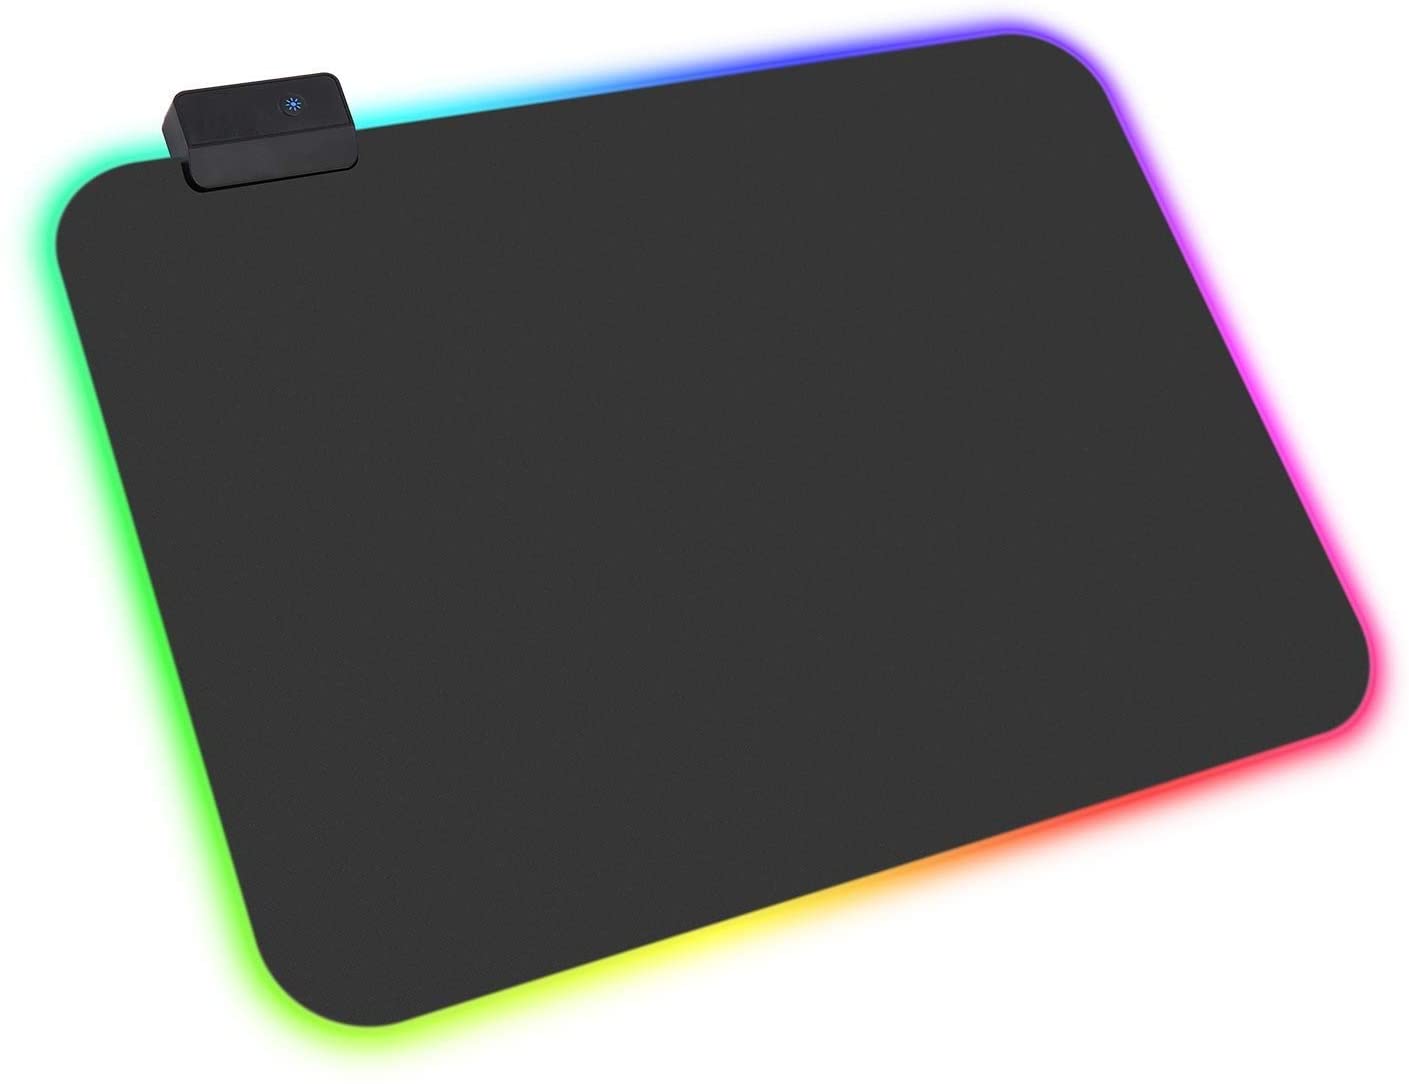 HF-IMMP04: Mouse Pad RGB, LED Lighting Effects Gaming Mice Pad Mat 14in*10in Non-Slip Rubber Base - Click Image to Close